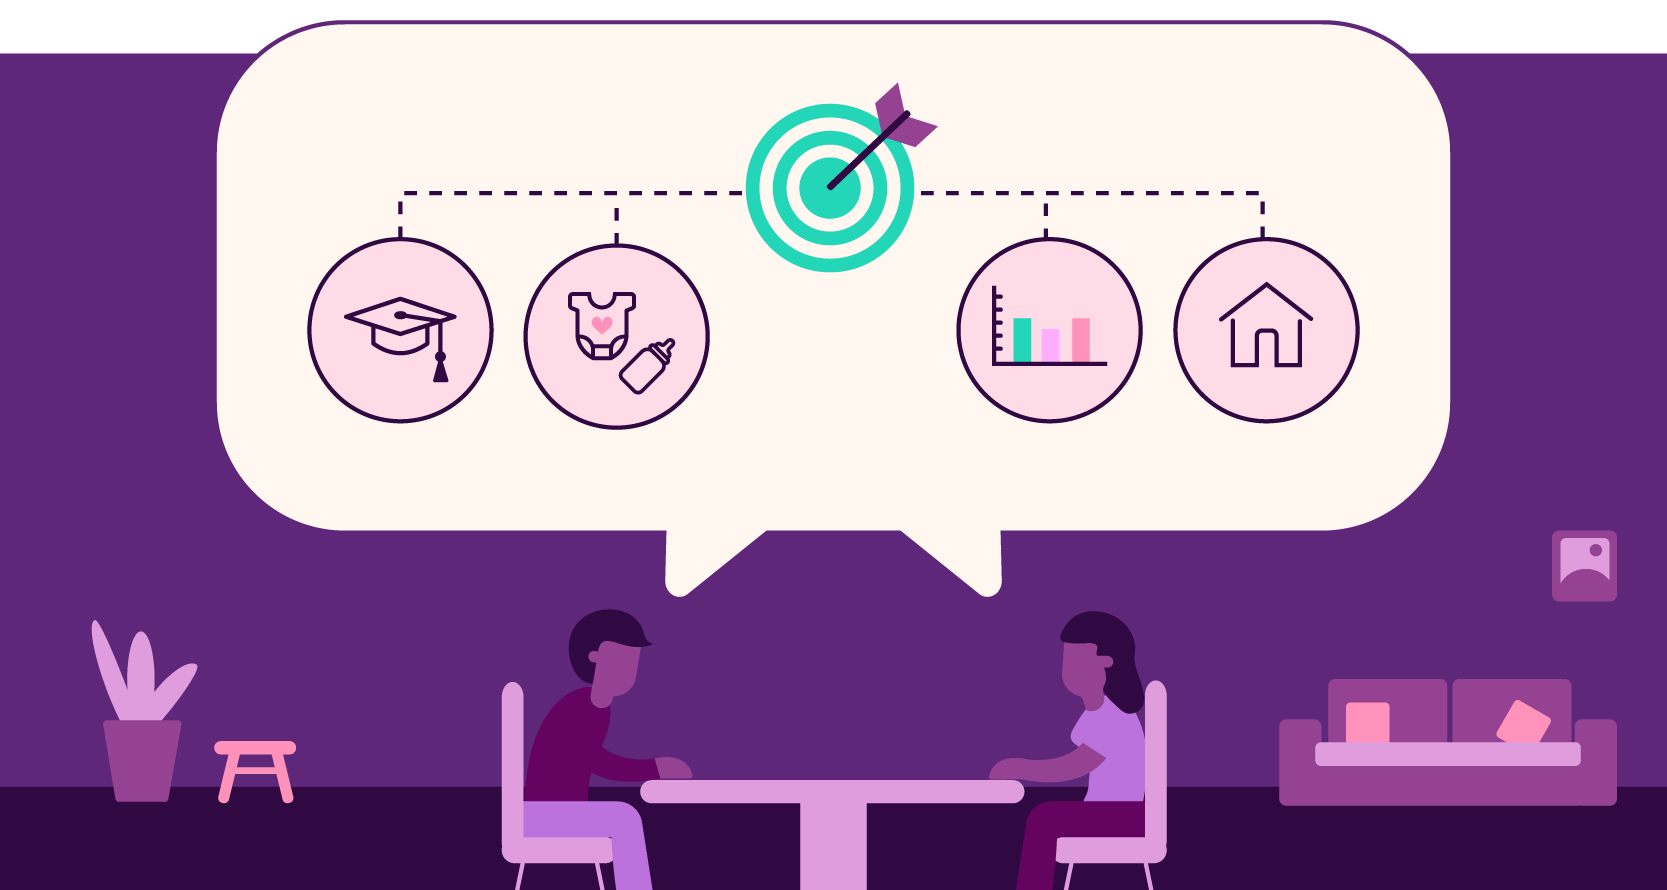 Illustration of a couple sitting at a table with a shared thought bubble showing a target and goals leading up toward the target: College, baby, investments, and home.